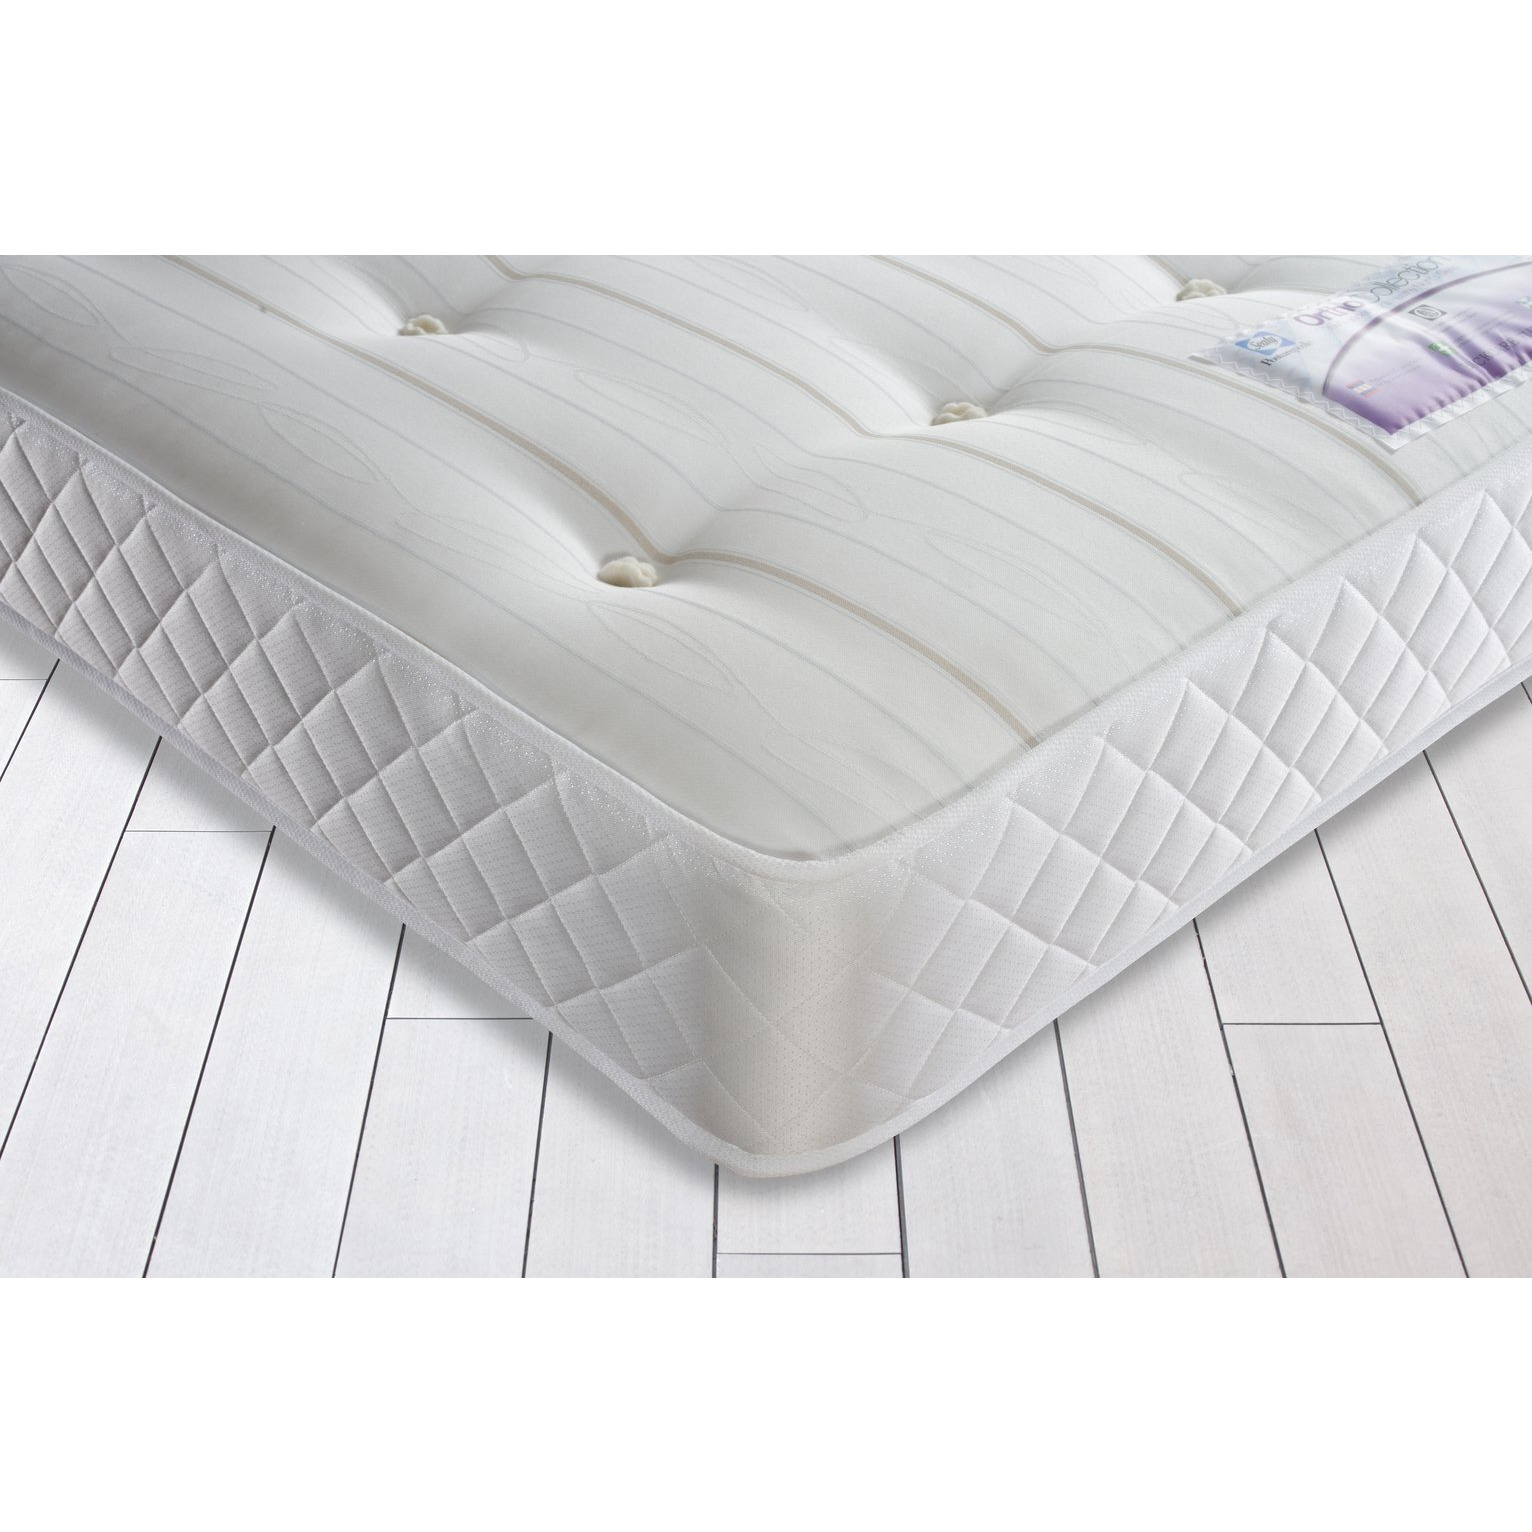 Sealy Posturepedic Sprung Firm Ortho Single Mattress - image 1